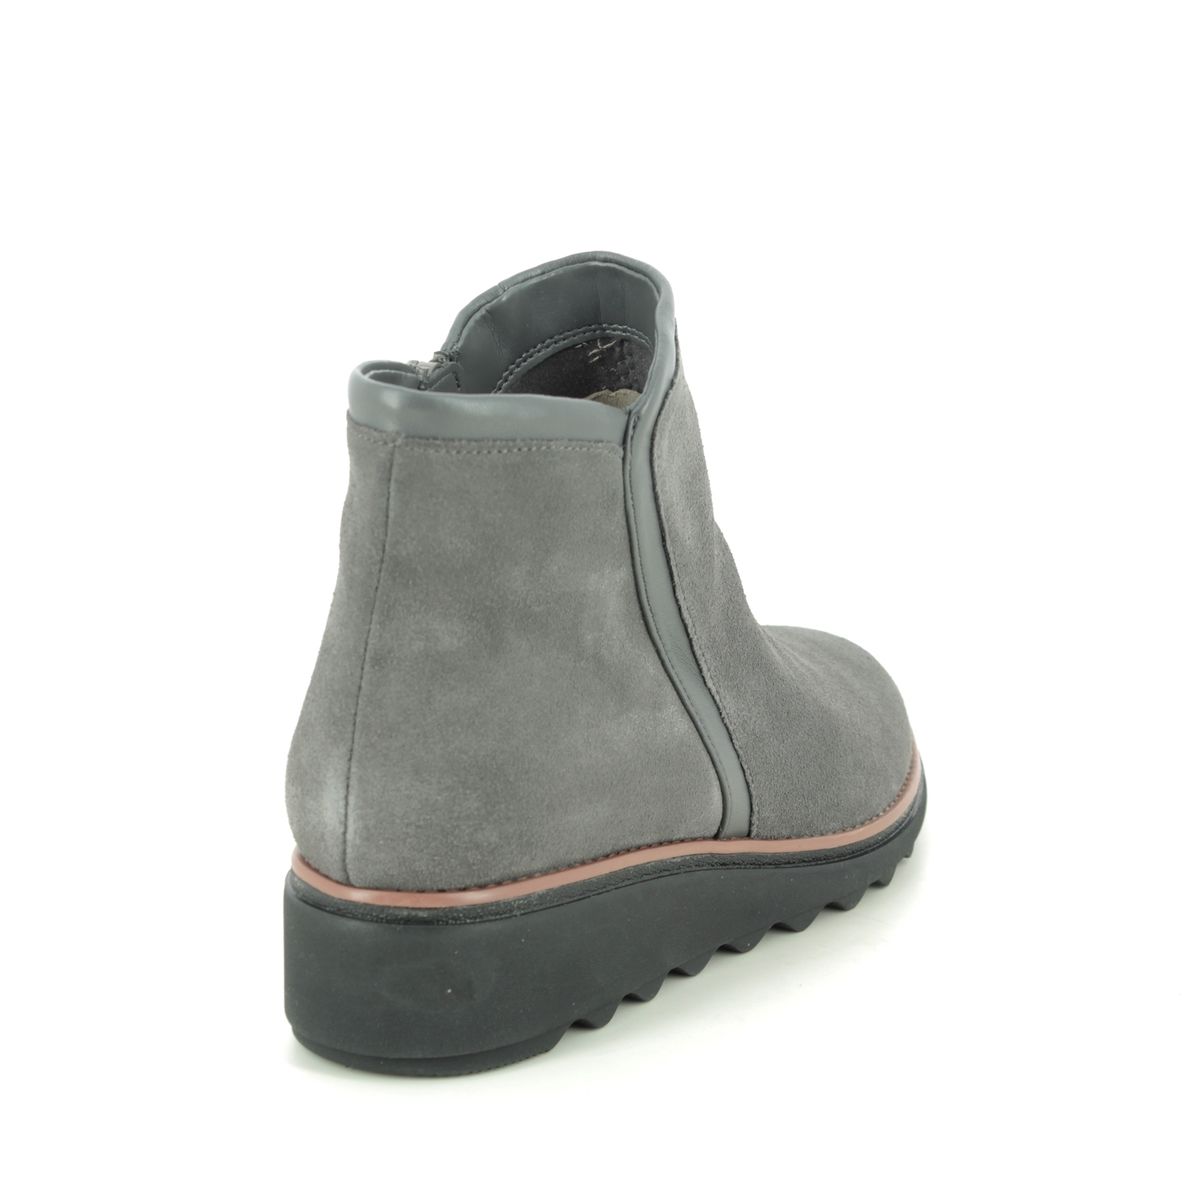 clarks wedge boots uk